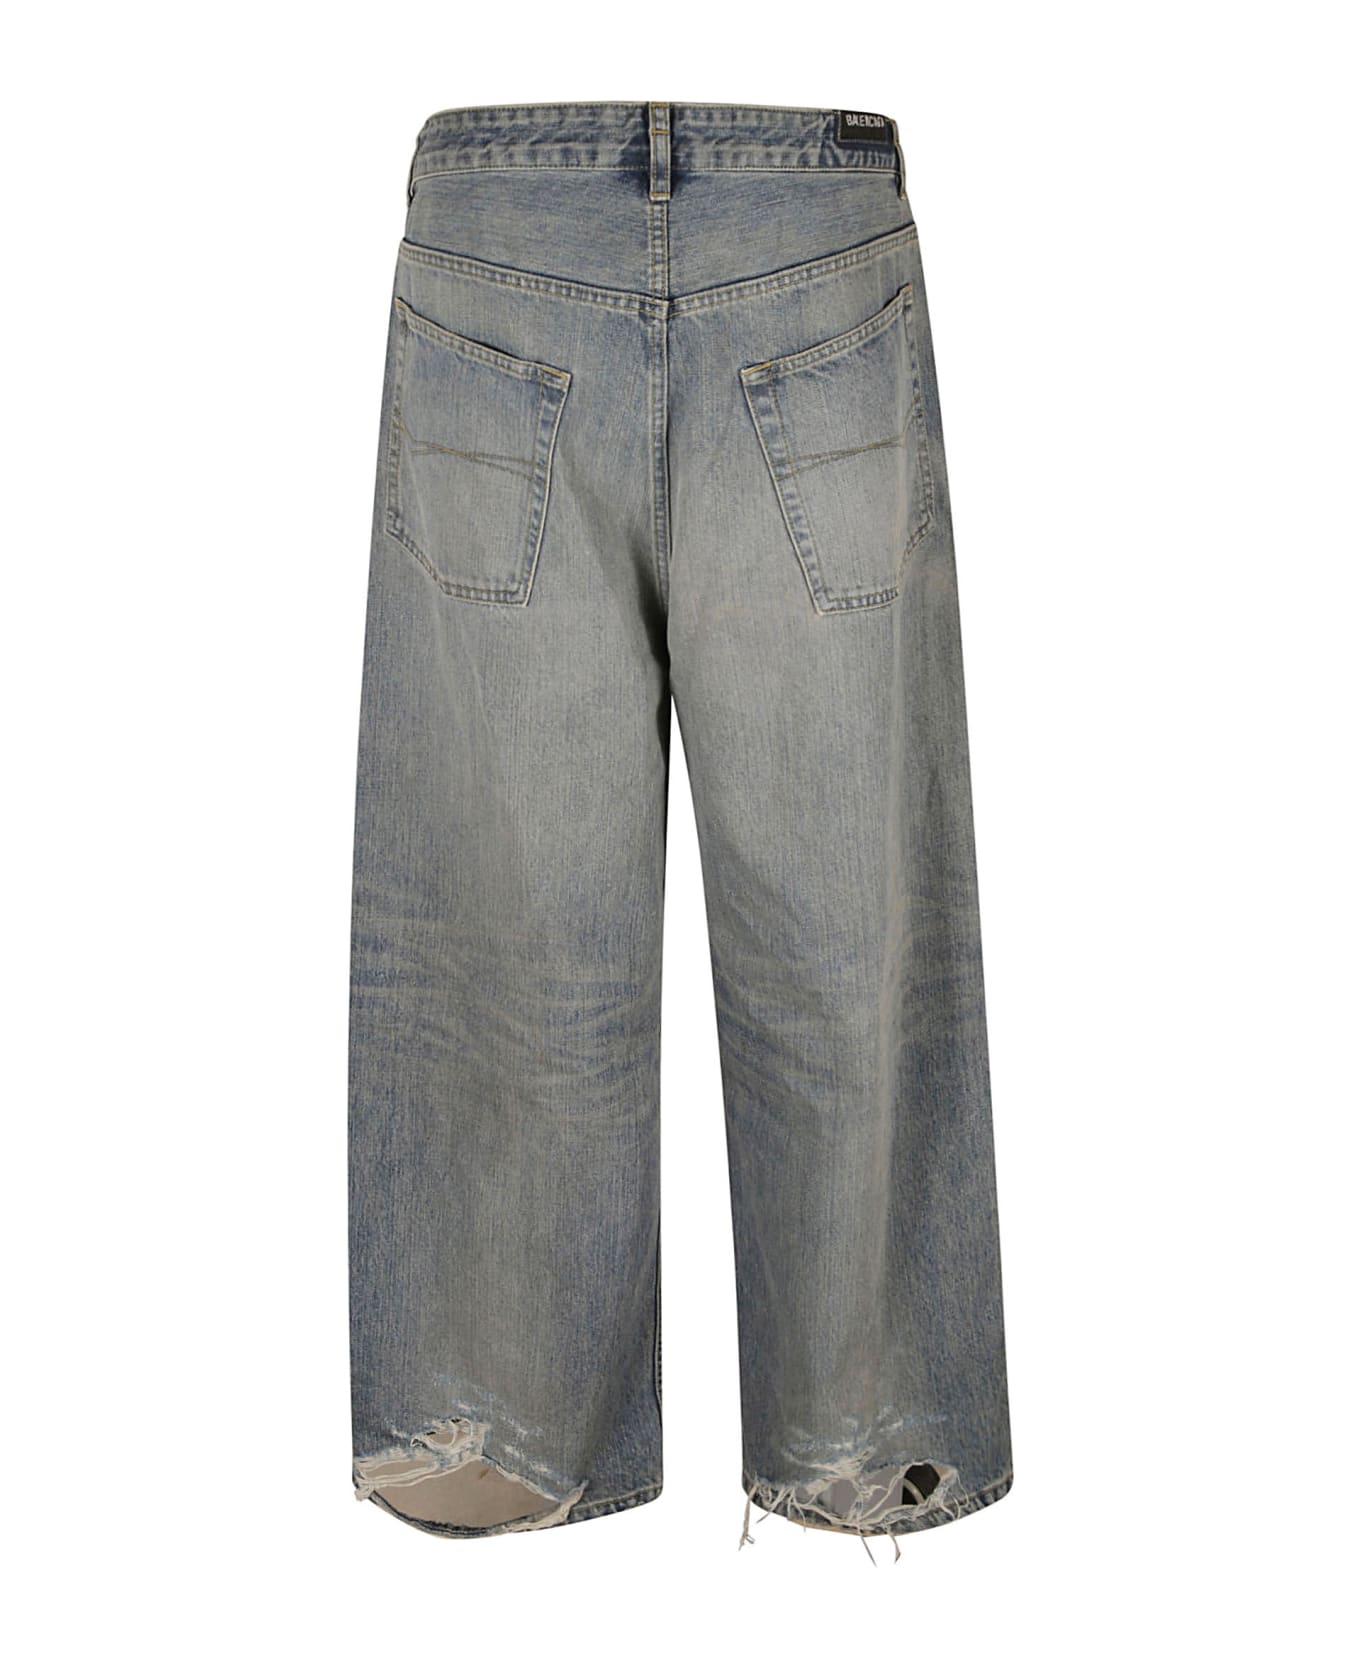 Balenciaga Baggy Cropped Jeans - Outback Bllue デニム